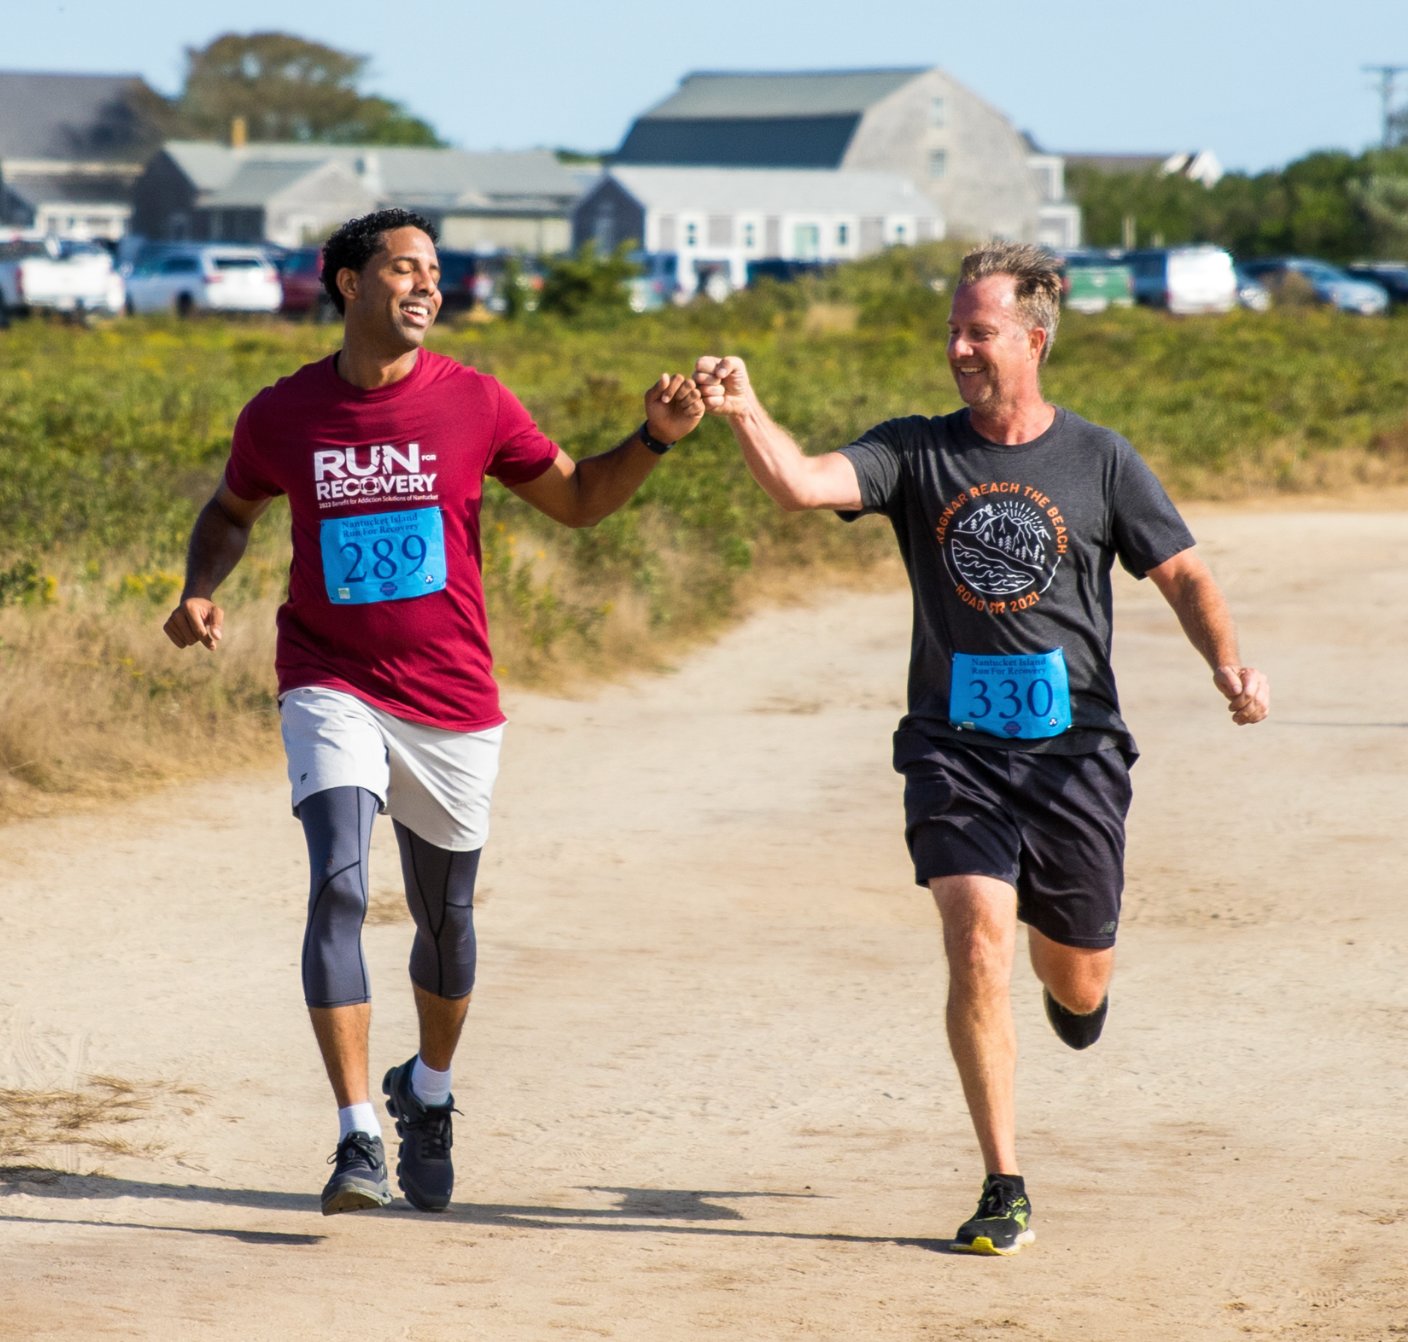 Sunday's Run for Recovery benefited Addiction Solutions of Nantucket.